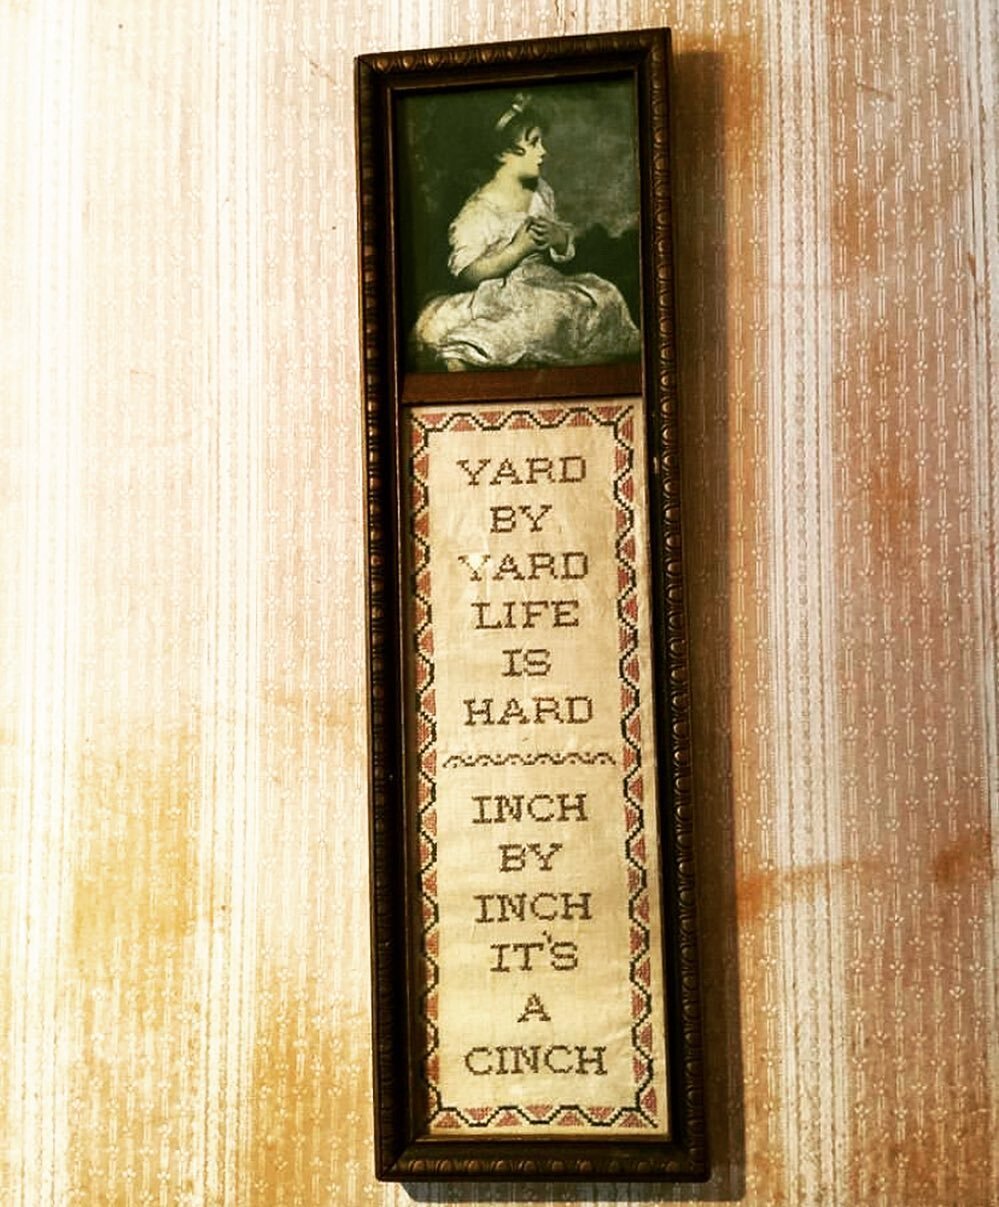 One stitch at a time... 

#stitchbystitch #historichouses #wisdom #hanginthere #practicepieces #historicnewjersey #samplers